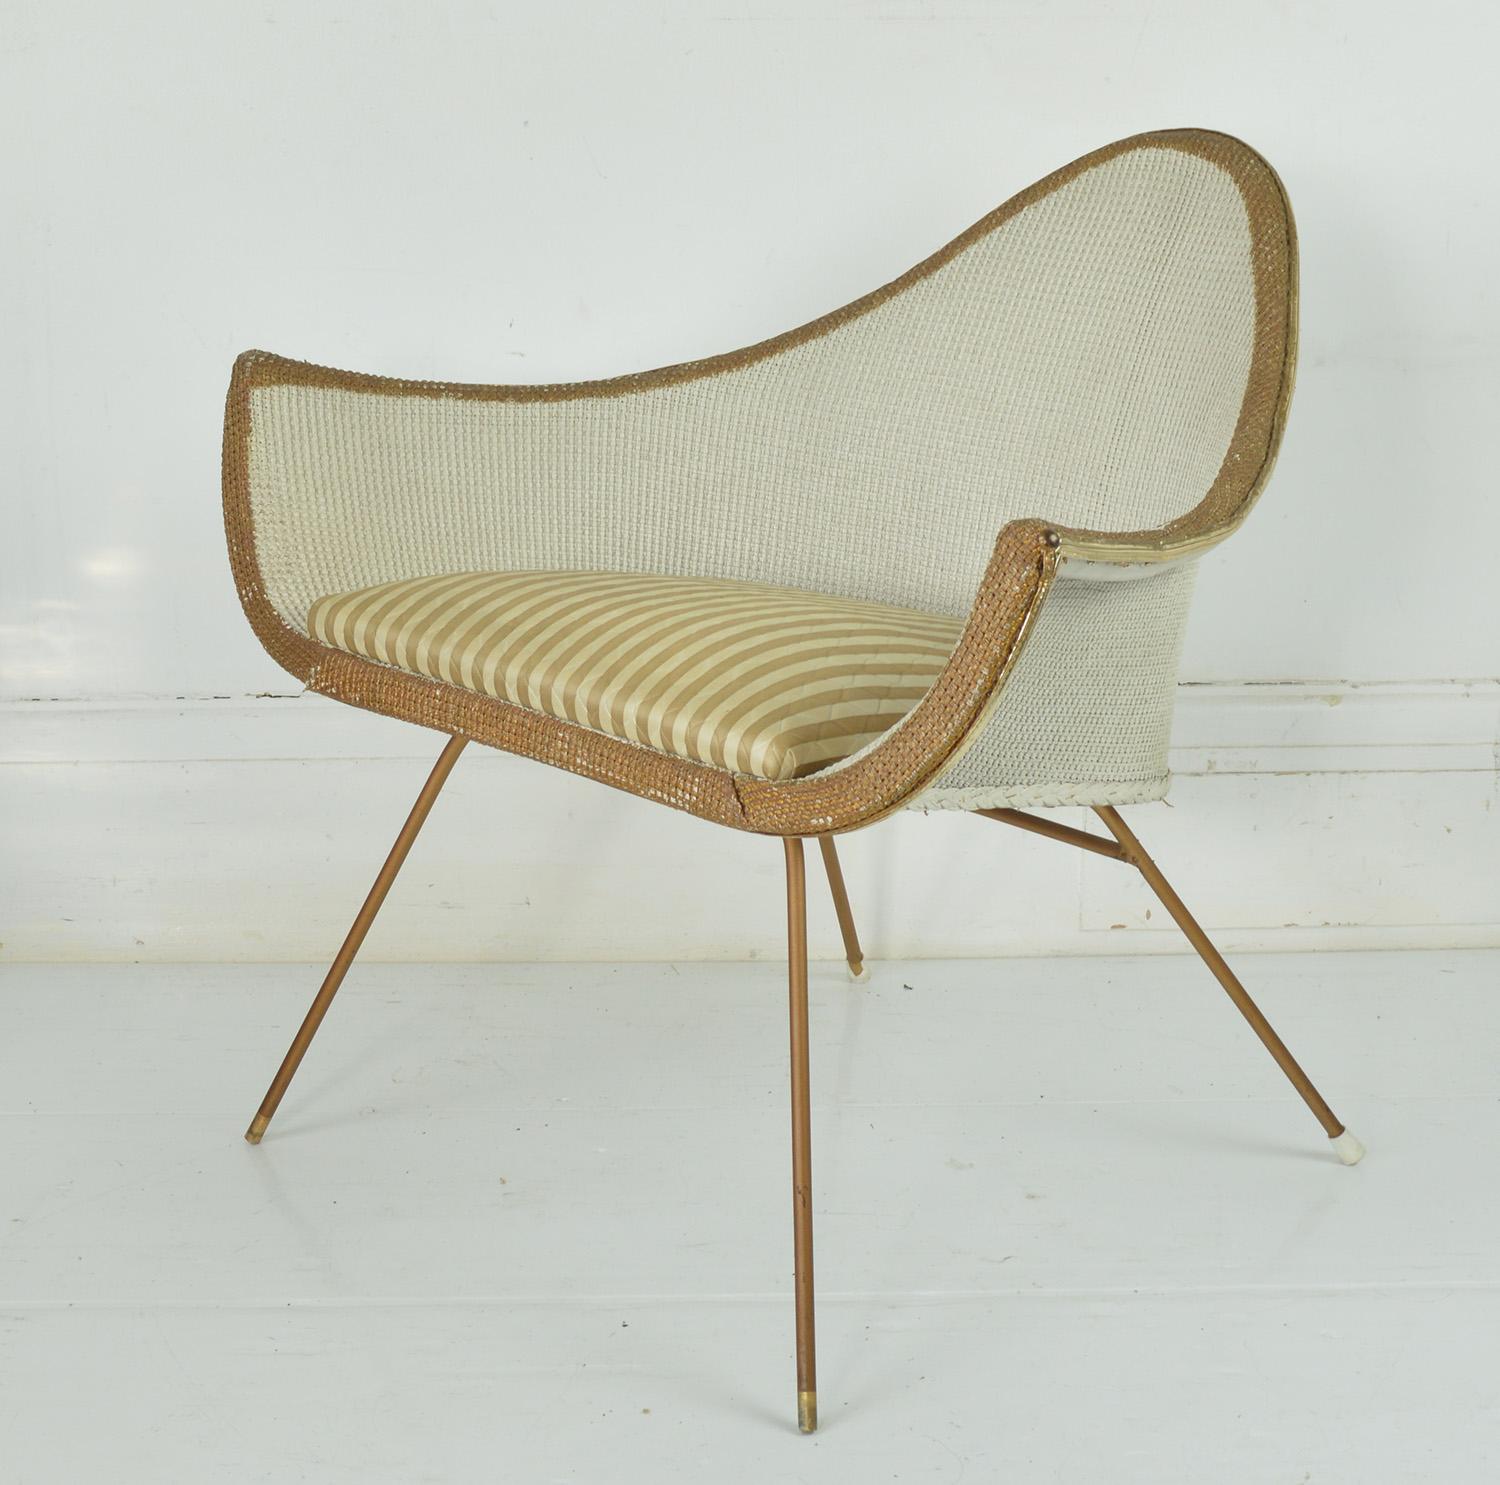 Very stylish chair. Such an amazing shape

The woven fibre is painted white and gold. It has been historically re-painted most likely in the same colors.

Gold vinyl trim. Metal supports.

The vinyl upholstery is original.
 